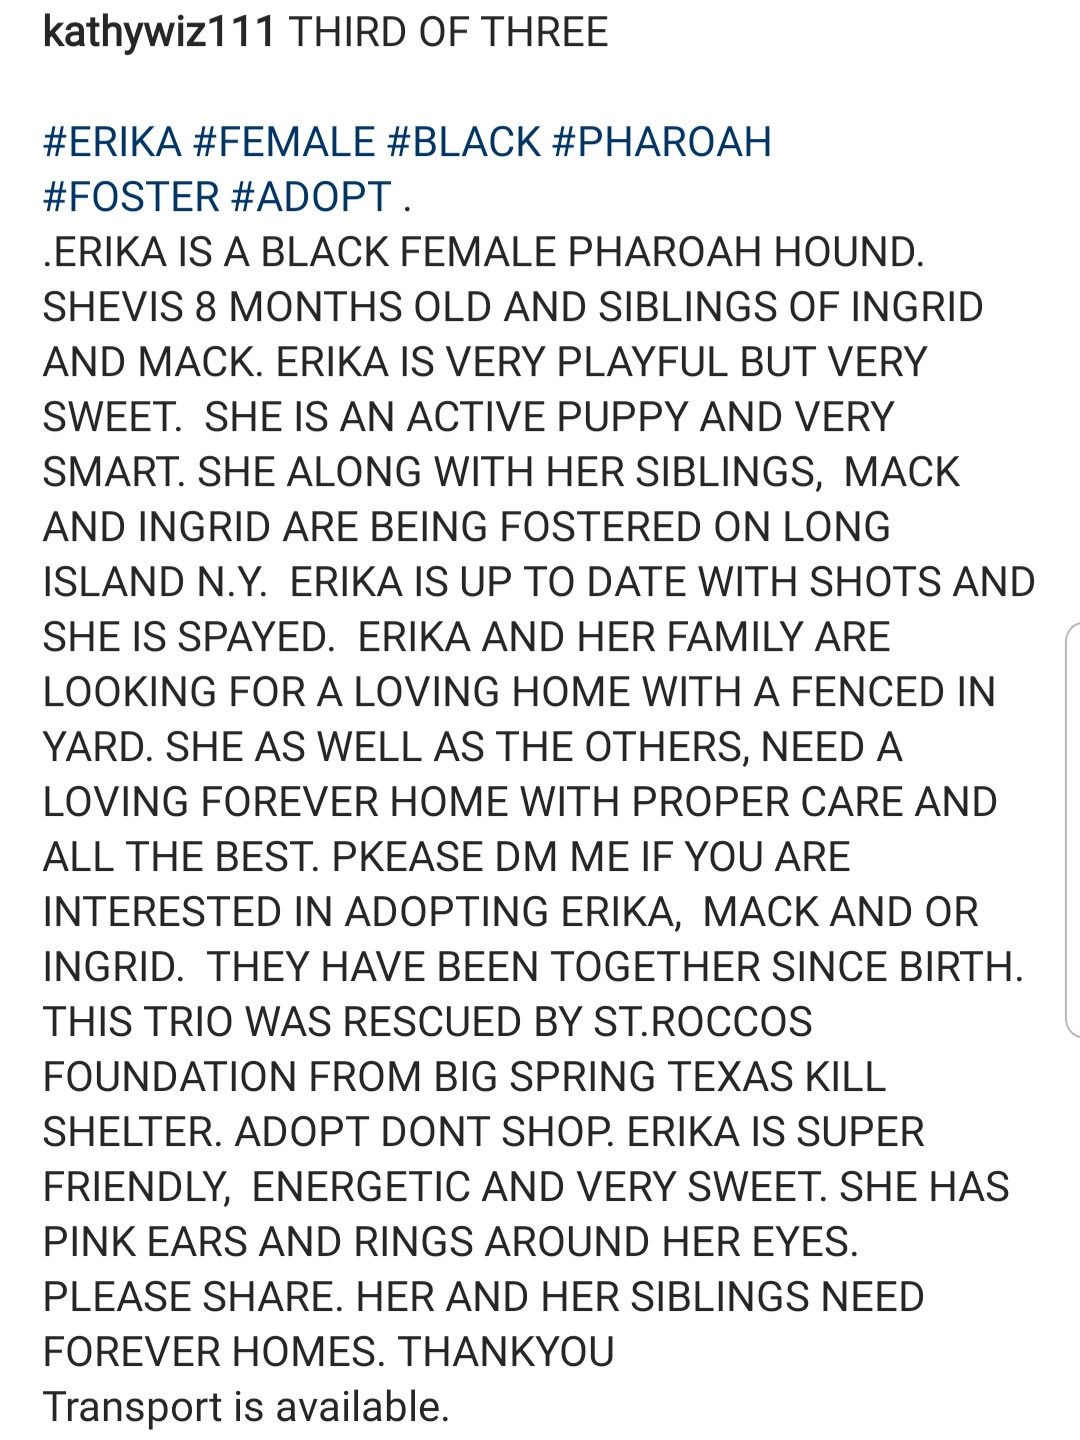 Erika Big Springs Foster Adopt Dog Rescue St Rocco Foundation Post